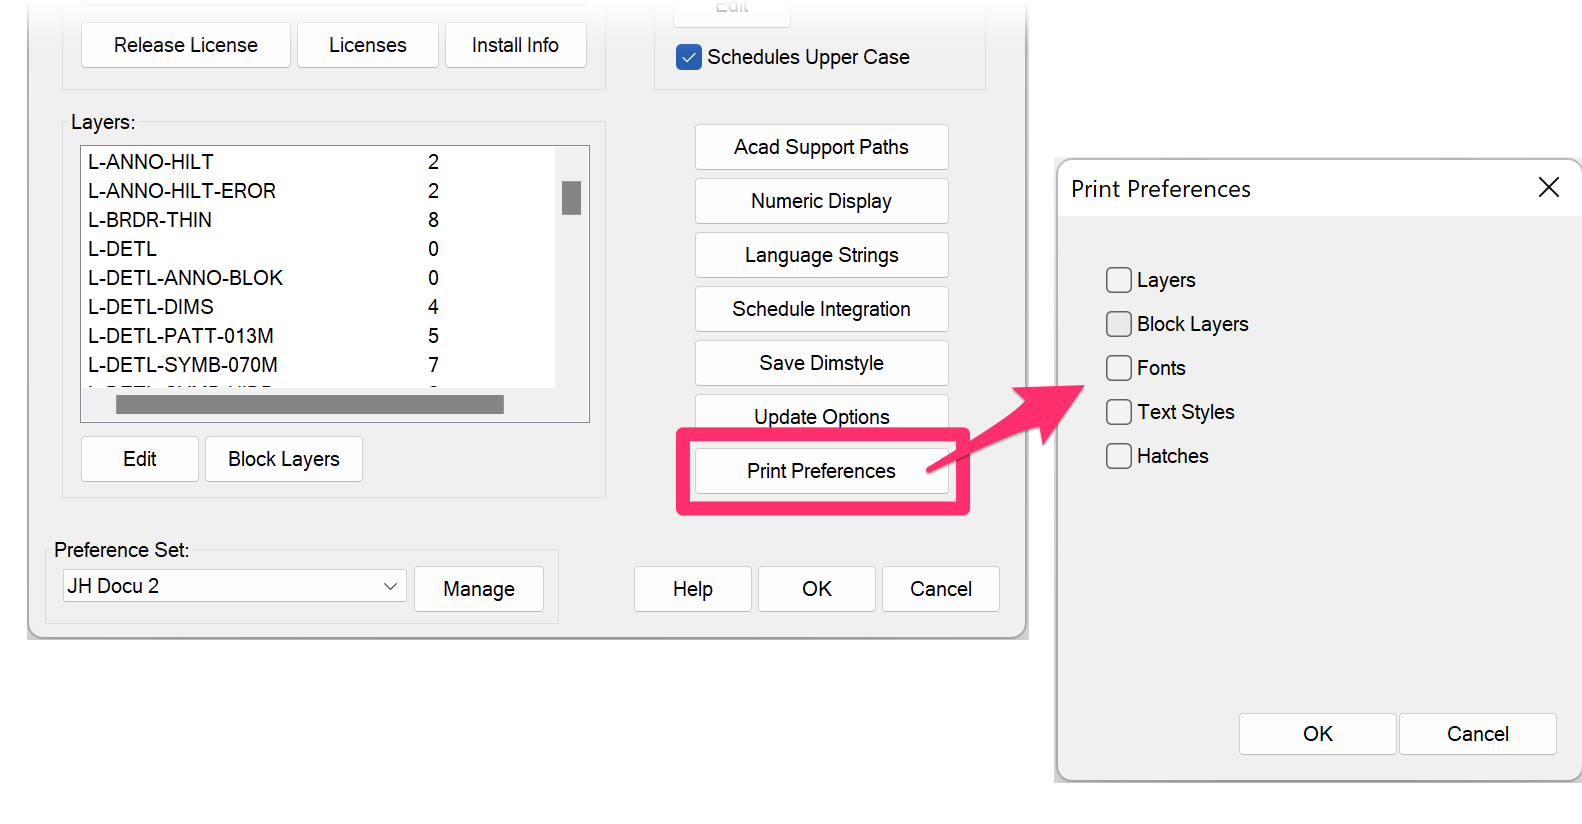 Print Preferences button in General Preferences and Print Preferences dialog box